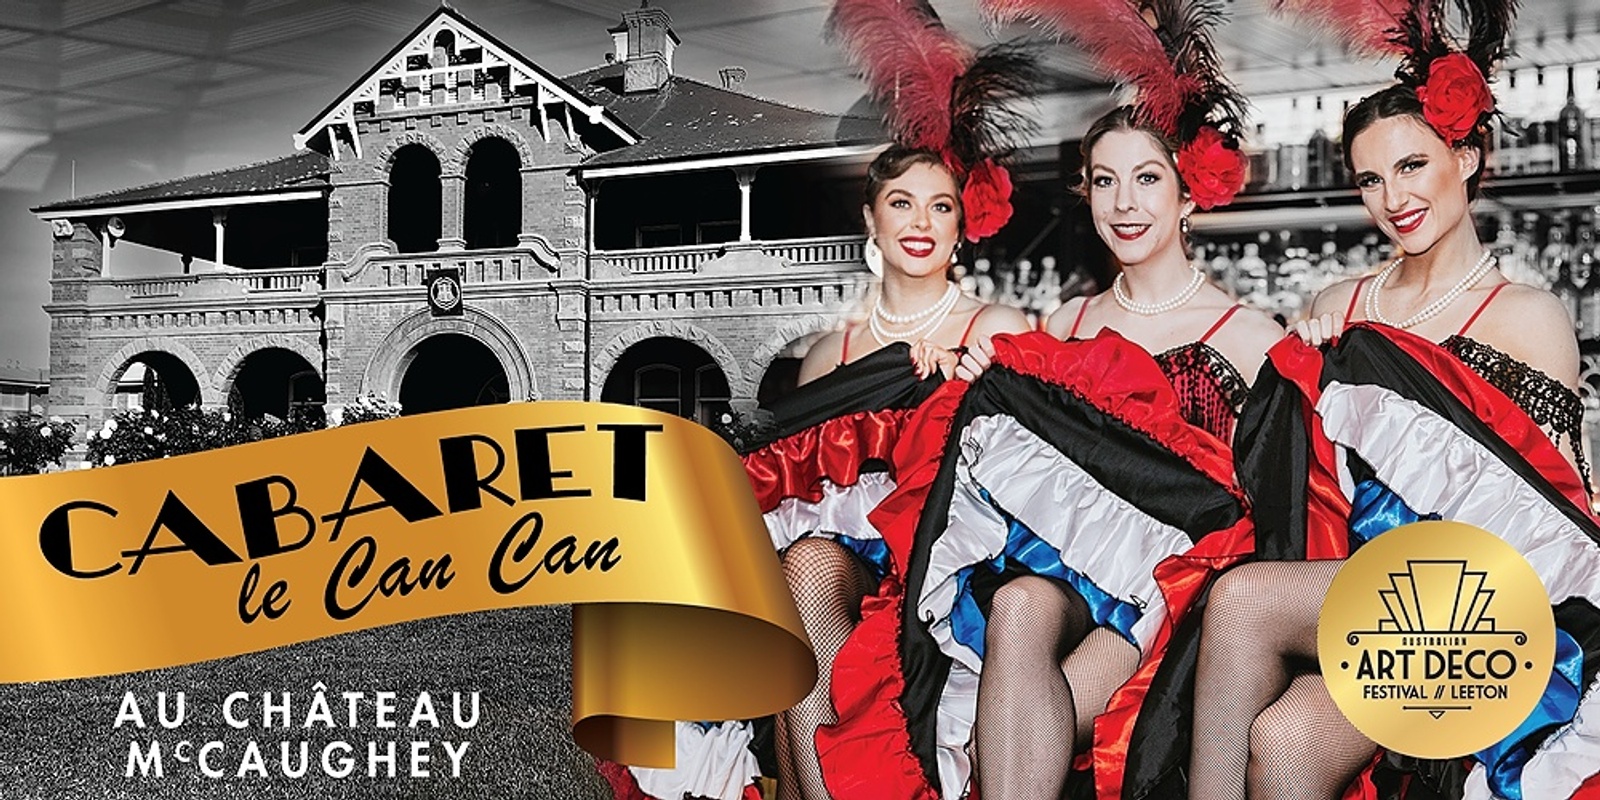 Banner image for Cabaret le Can Can 